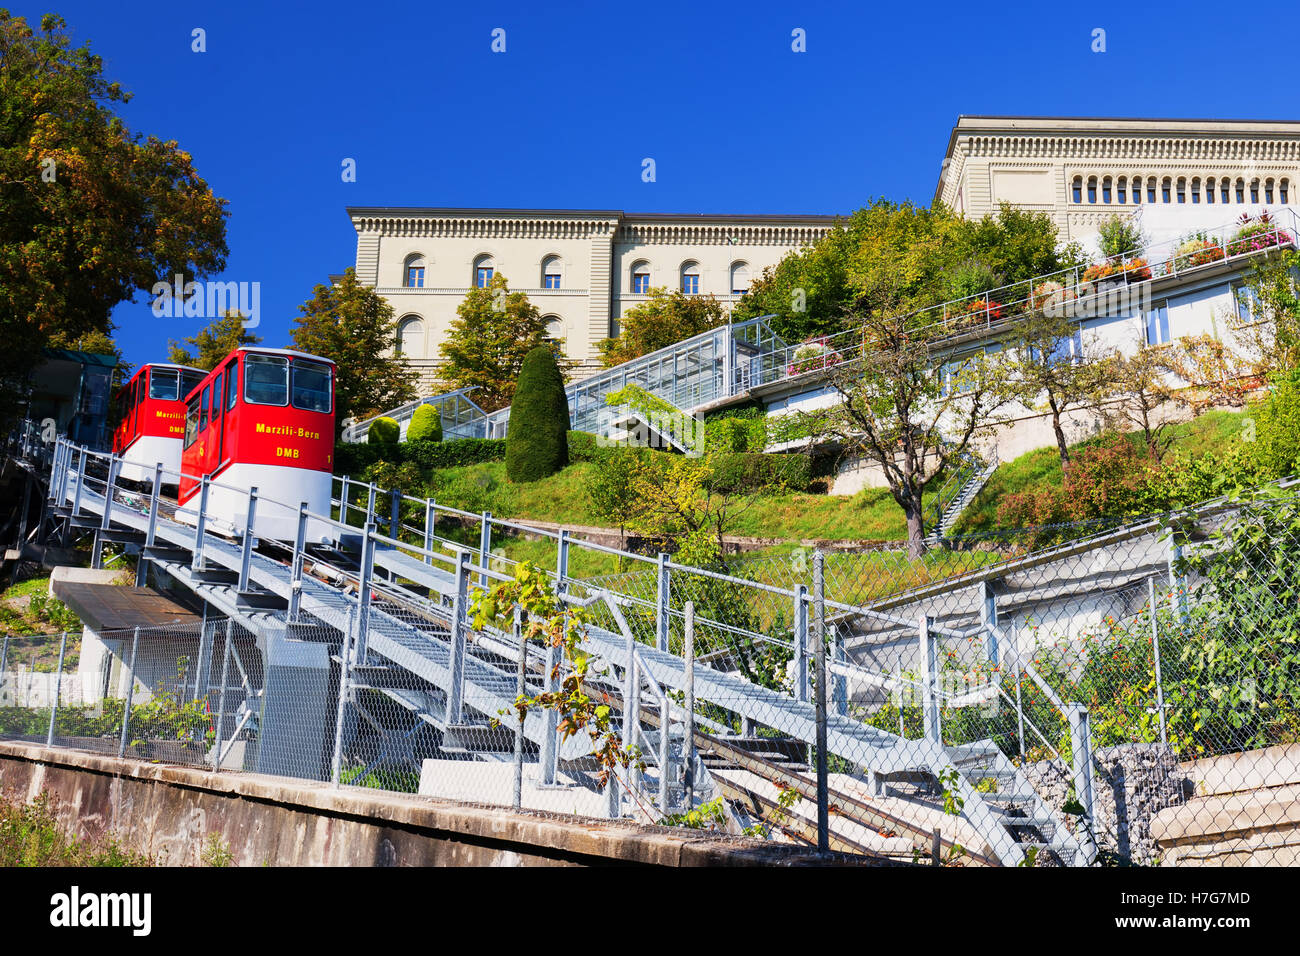 Marzili Bern funicular in the old city center of Bern town.  Bern is capital of Switzerland Stock Photo